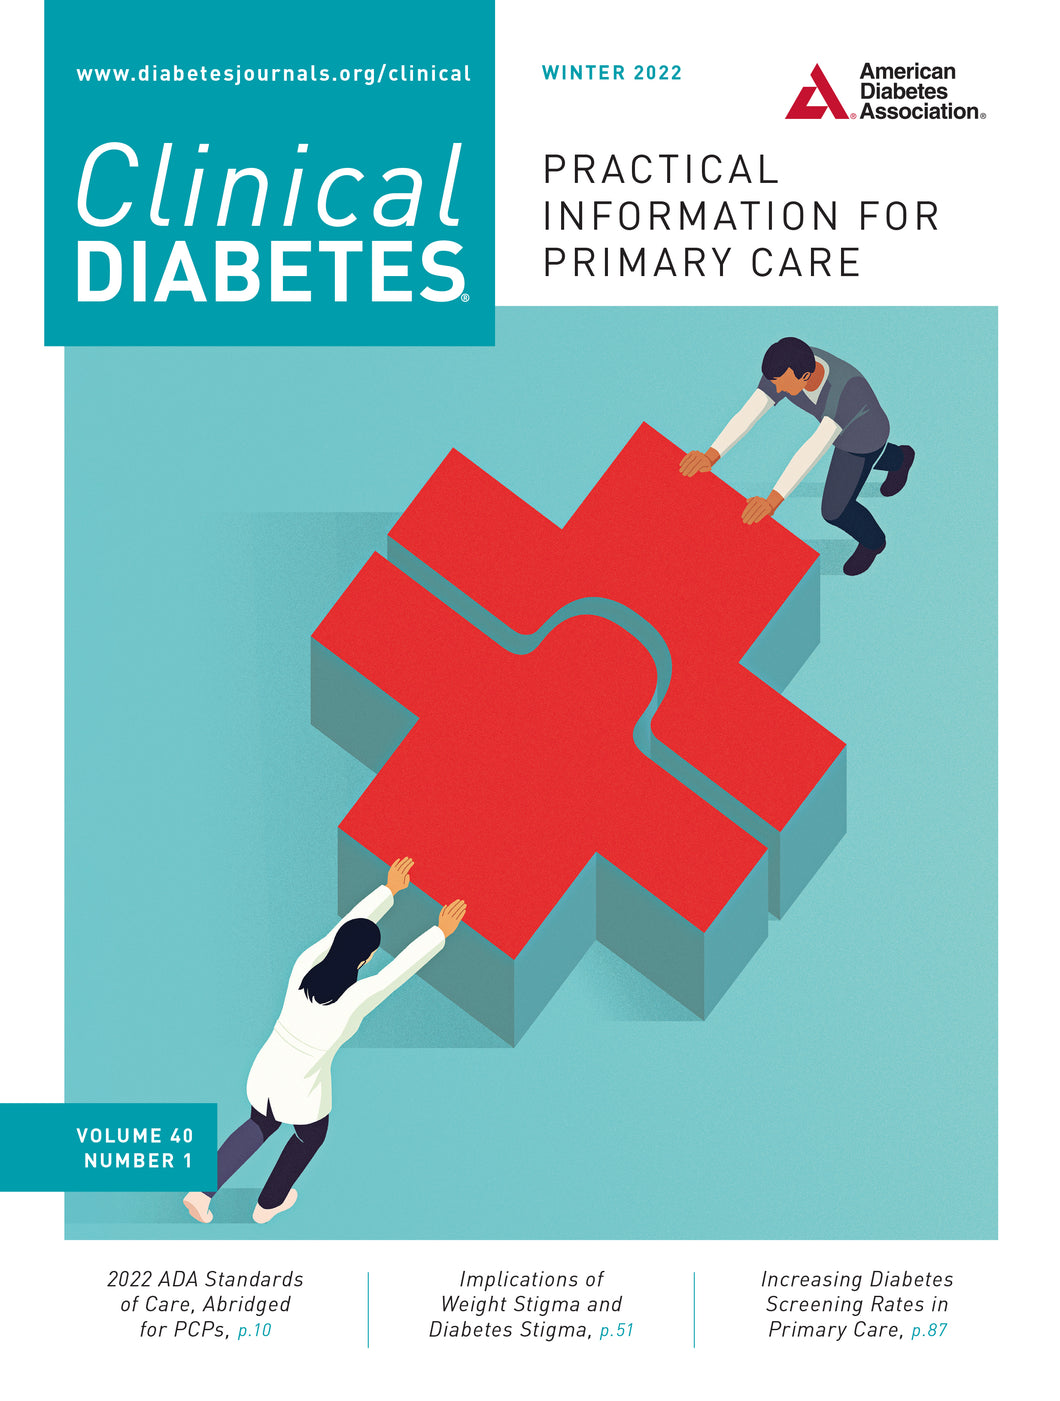 Clinical Diabetes, Volume 40, Issue 1, Winter 2022